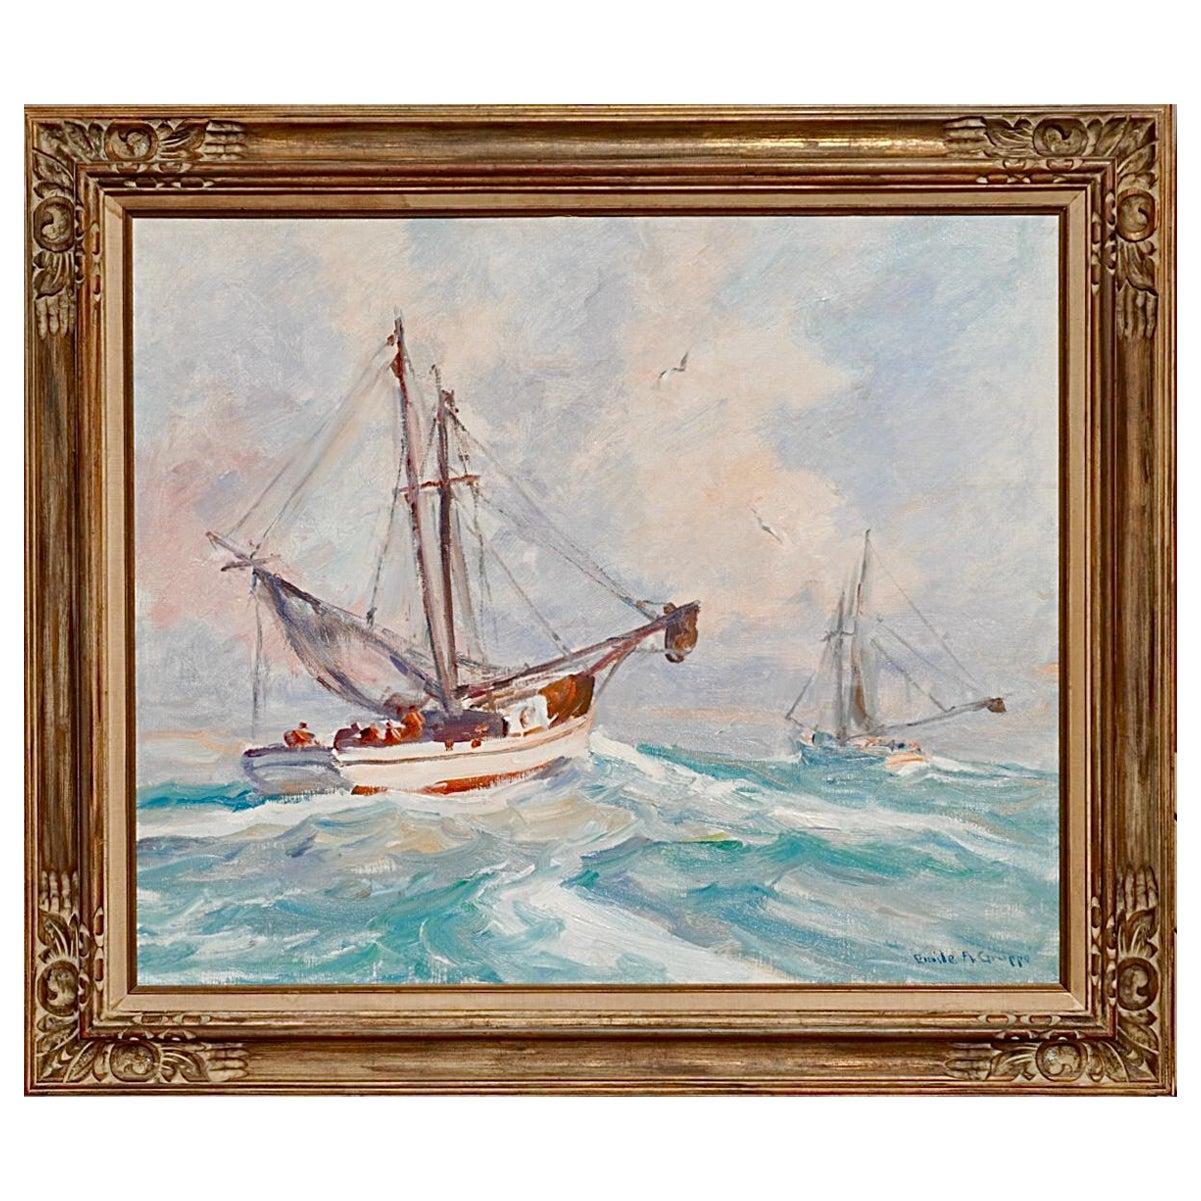 Emile Gruppé (1896-1978)
Fishing Boats 

A large and commanding marine sailboat fishing boat scene with blue waters and blue skies. Birds are flying up above and fish swimming below and the one task at hand is collecting those fish. The elaborate